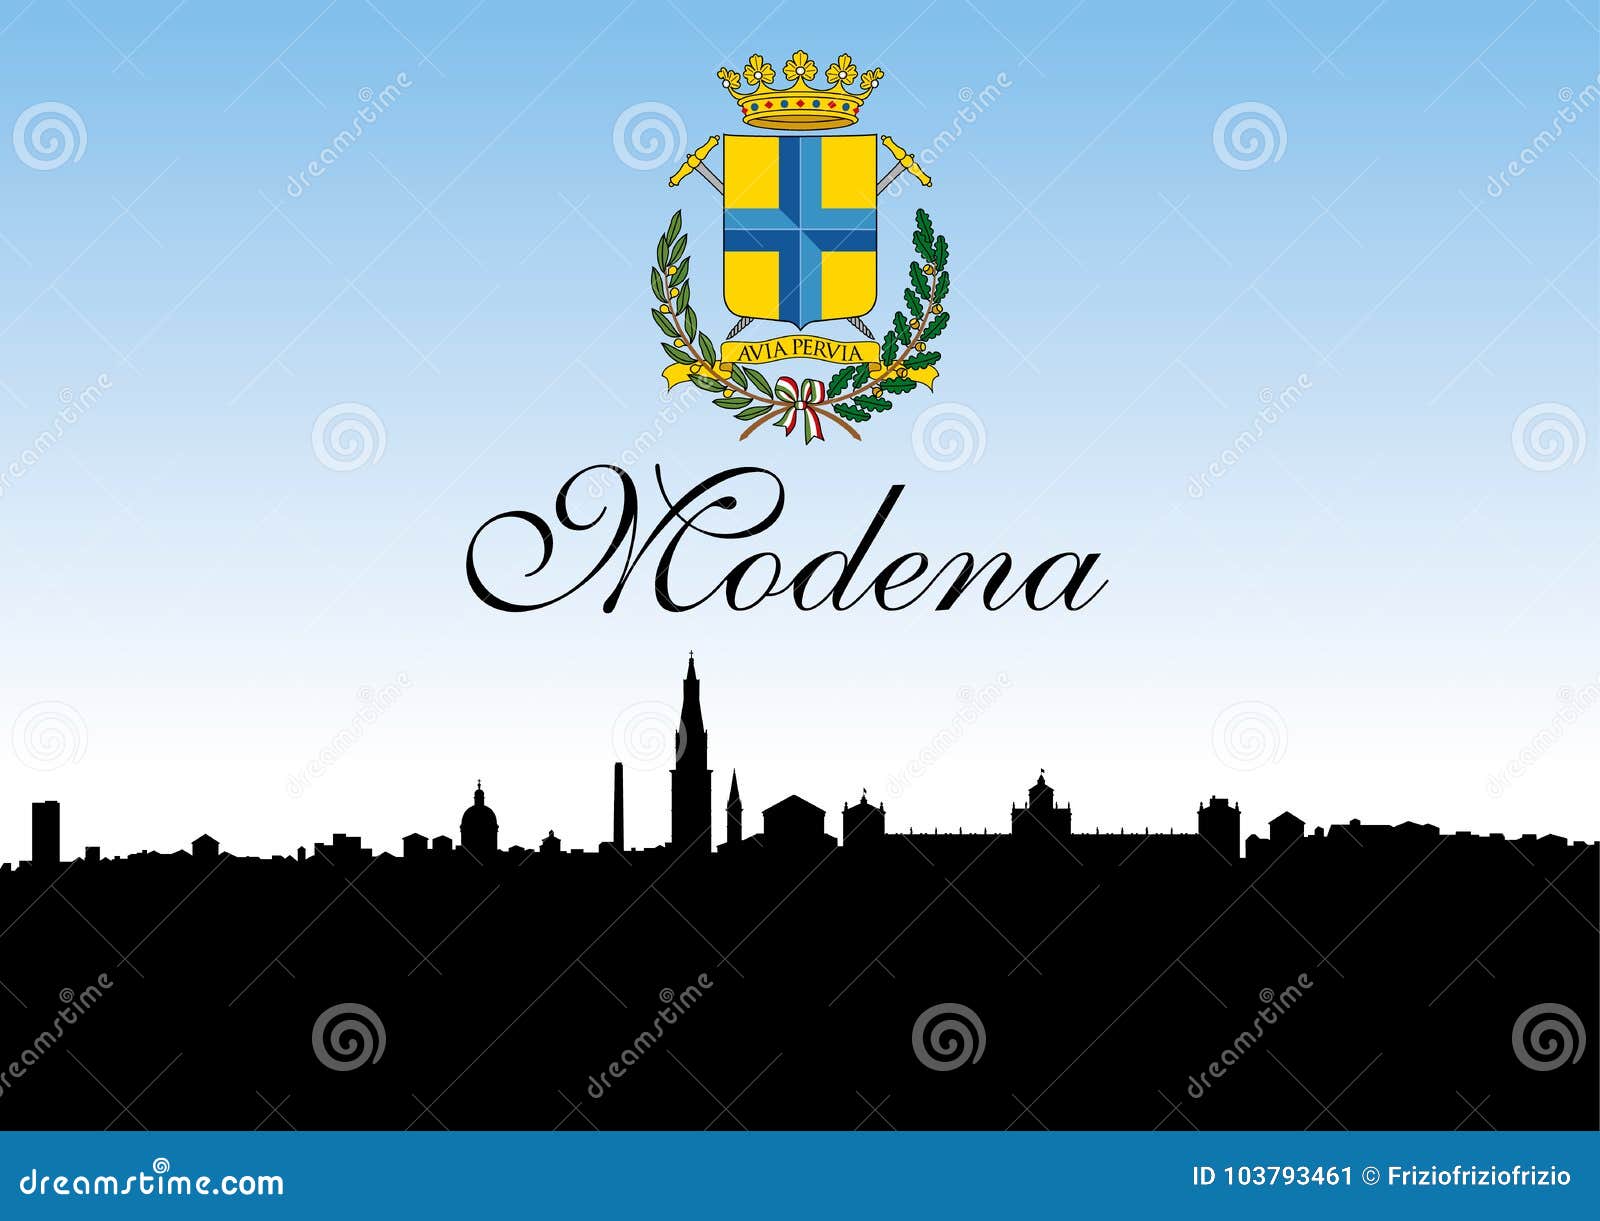 modena city, italy, skyline silhouette and coat of arms